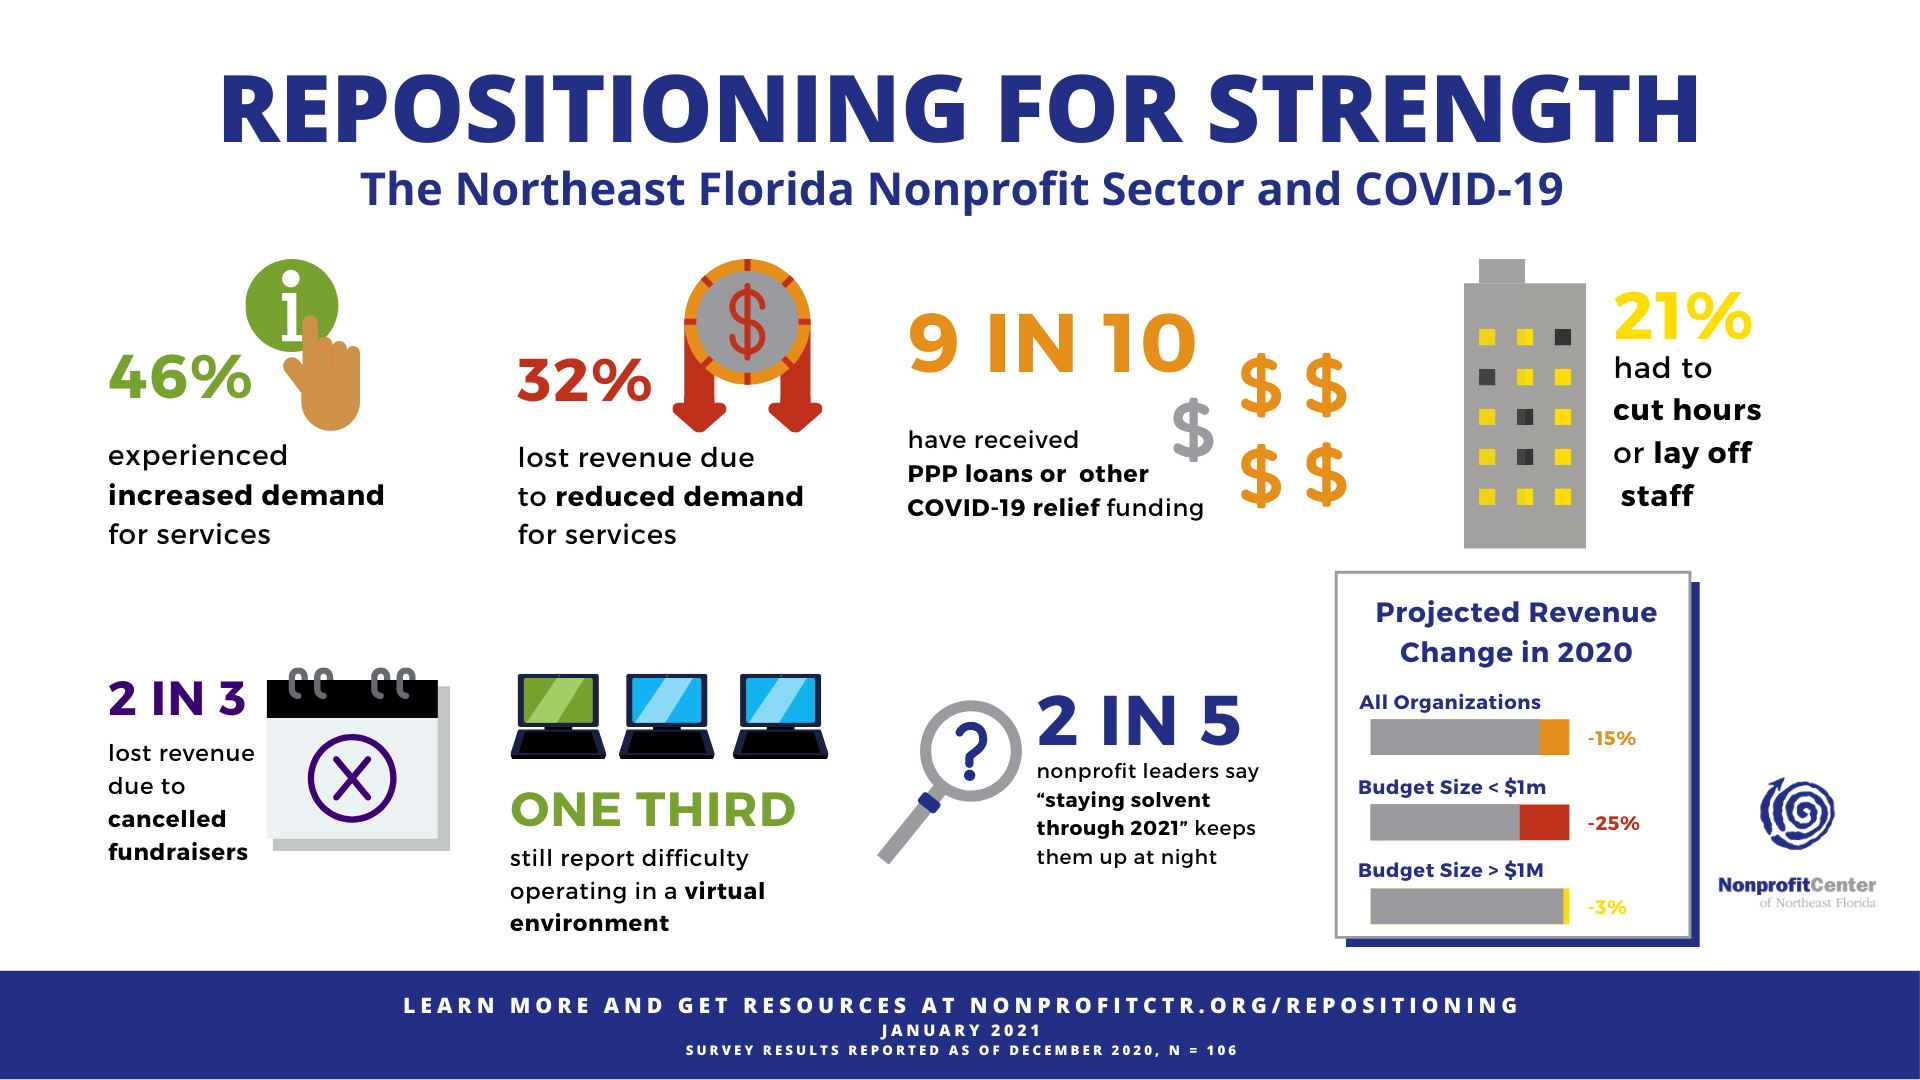 Repositioning For Strength Infographic describing the impact of nonprofits in Northeast Florida. 46% have experienced an increase in demand for services, 32% have lost revenue due to decreased demand for services, 9 in 10 have received some form of COVID-19 financial assistance, 21% had to cut hours or lay off staff, 2 in 3 lost revenue due to cancelled events, one third reported difficulty operating in a virtual environment, 2 in 5 nonprofit leaders say “staying solvent through 2021” keeps them up at night. A graph depicts predicted revenue change across organizations in 2020, with all organizations predicting a 15% revenue loss, orgs with budgets under 1 Million dollars predicting a 25% revenue loss, and orgs with budgets over 1 Million dollars predicting a 3% loss.